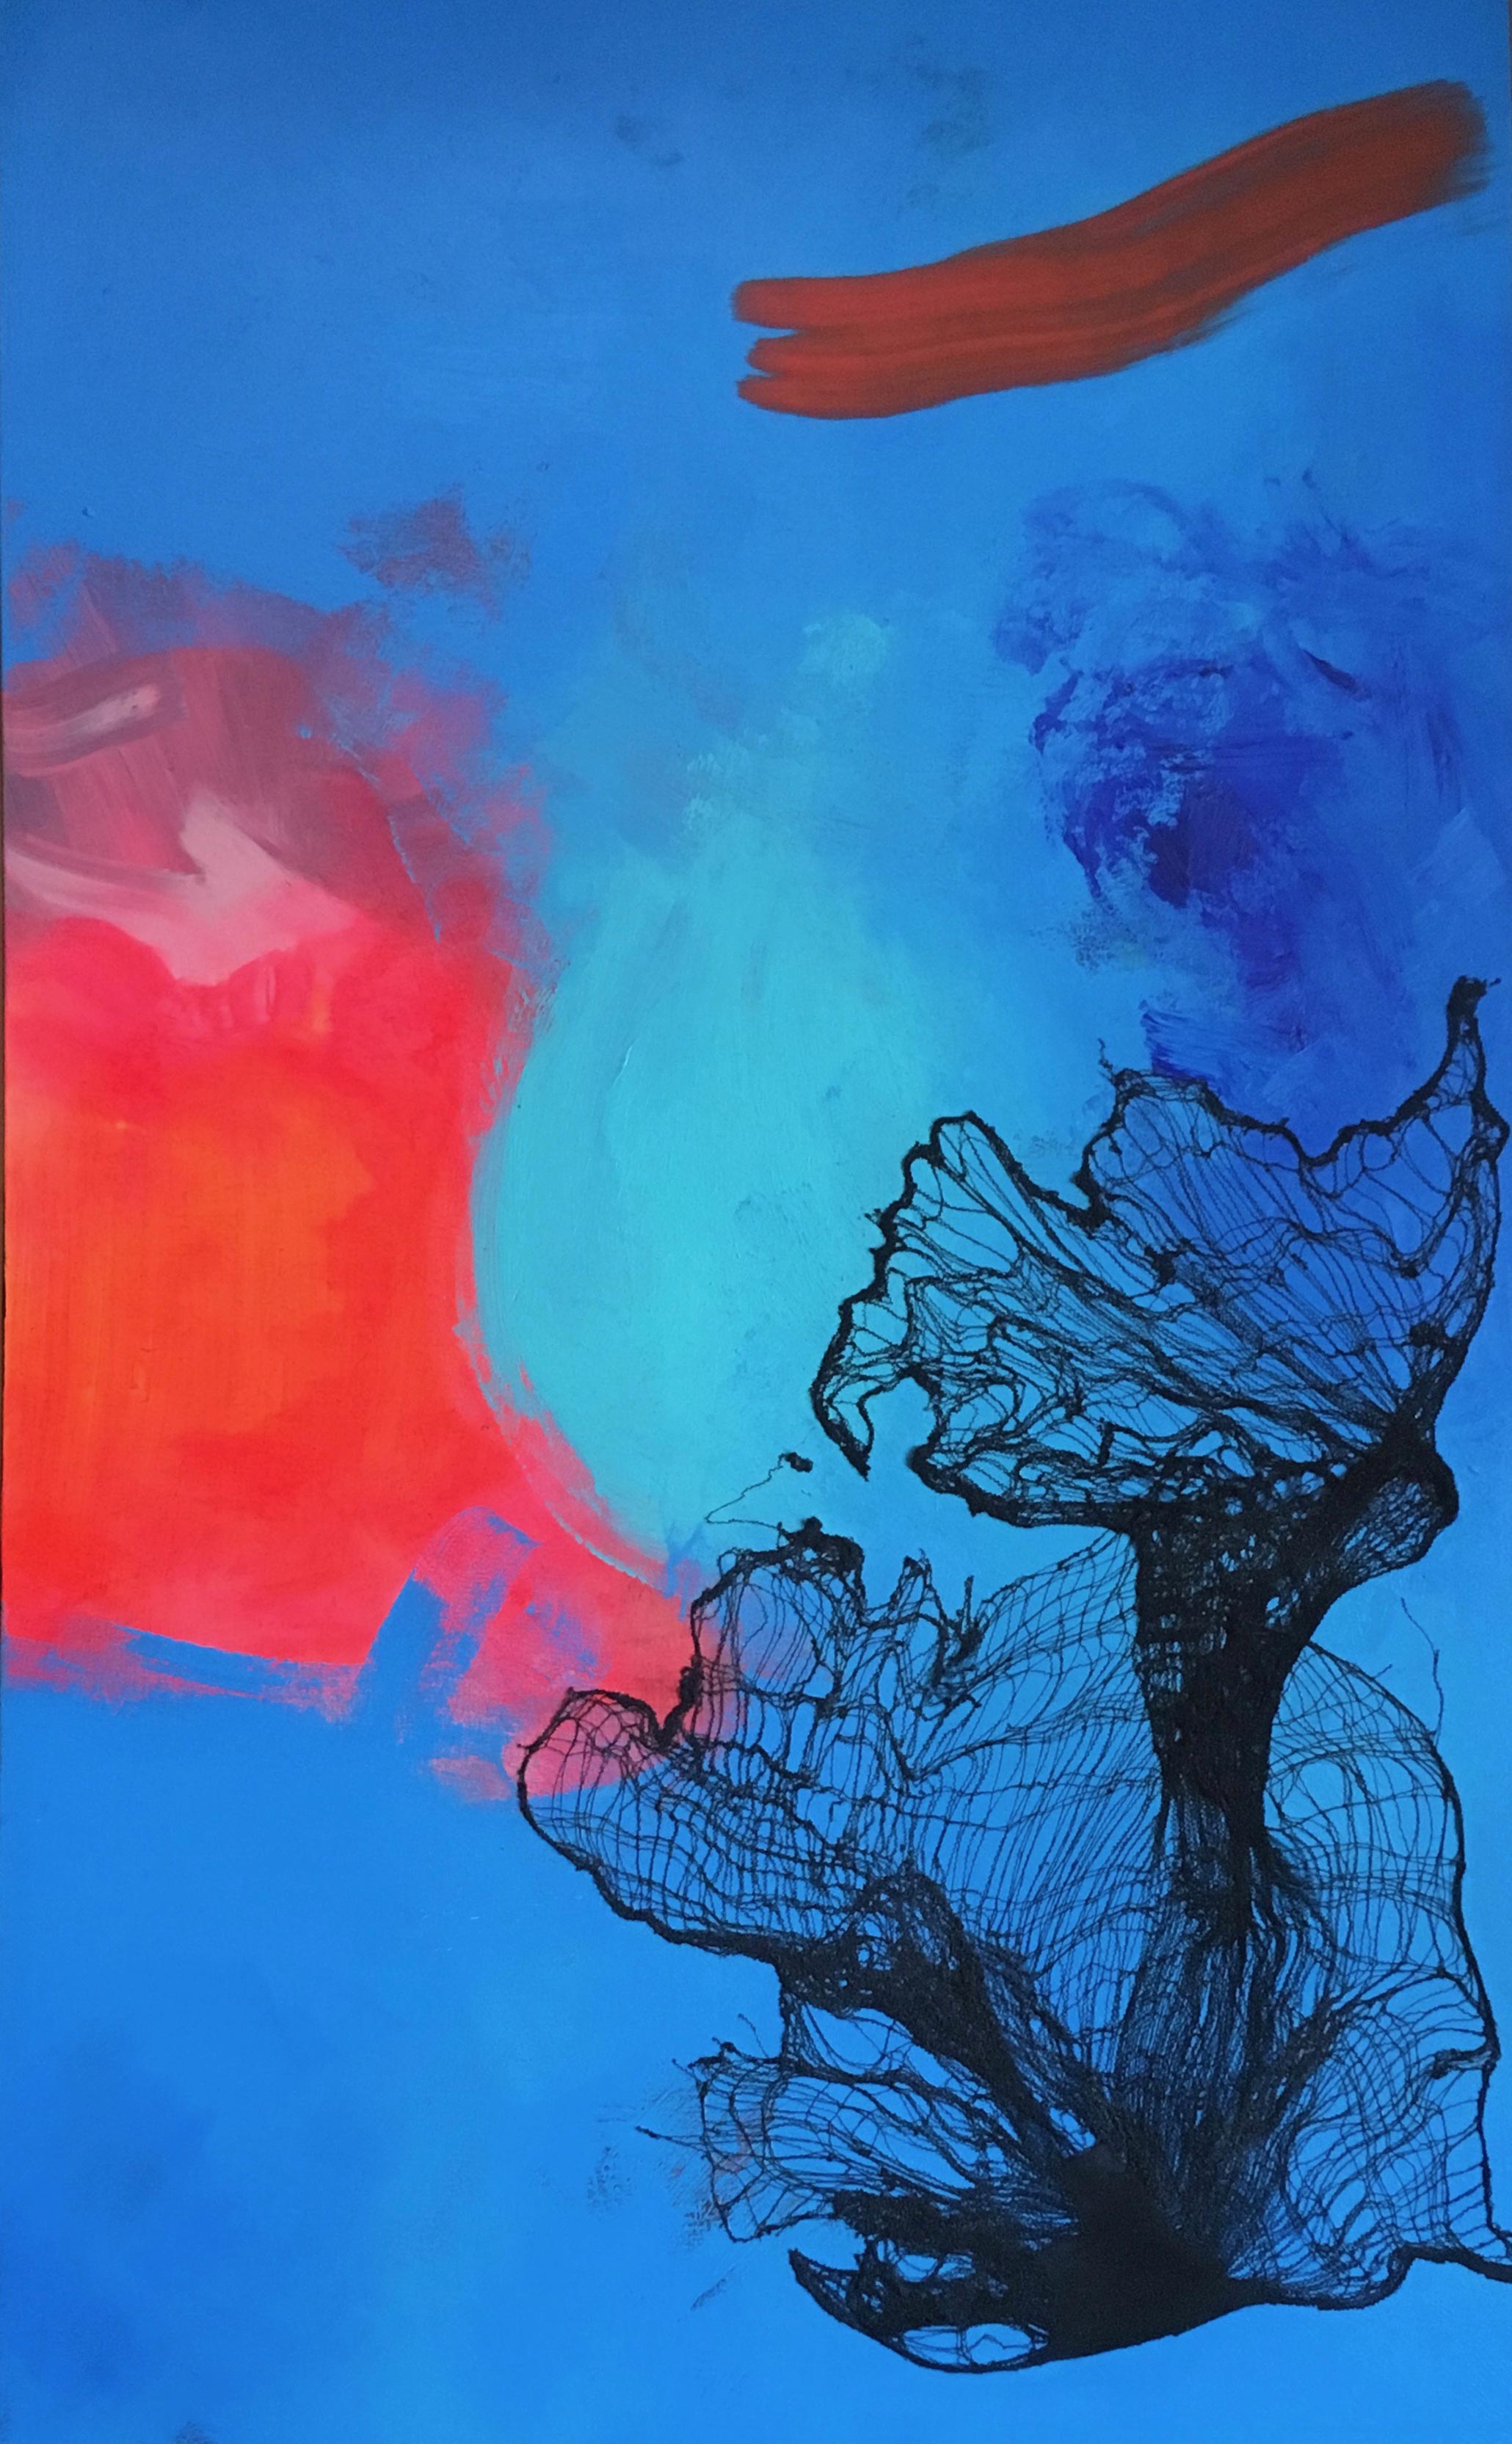 Painting of red, blue, and a silhouette accent by Janie Arguedas.